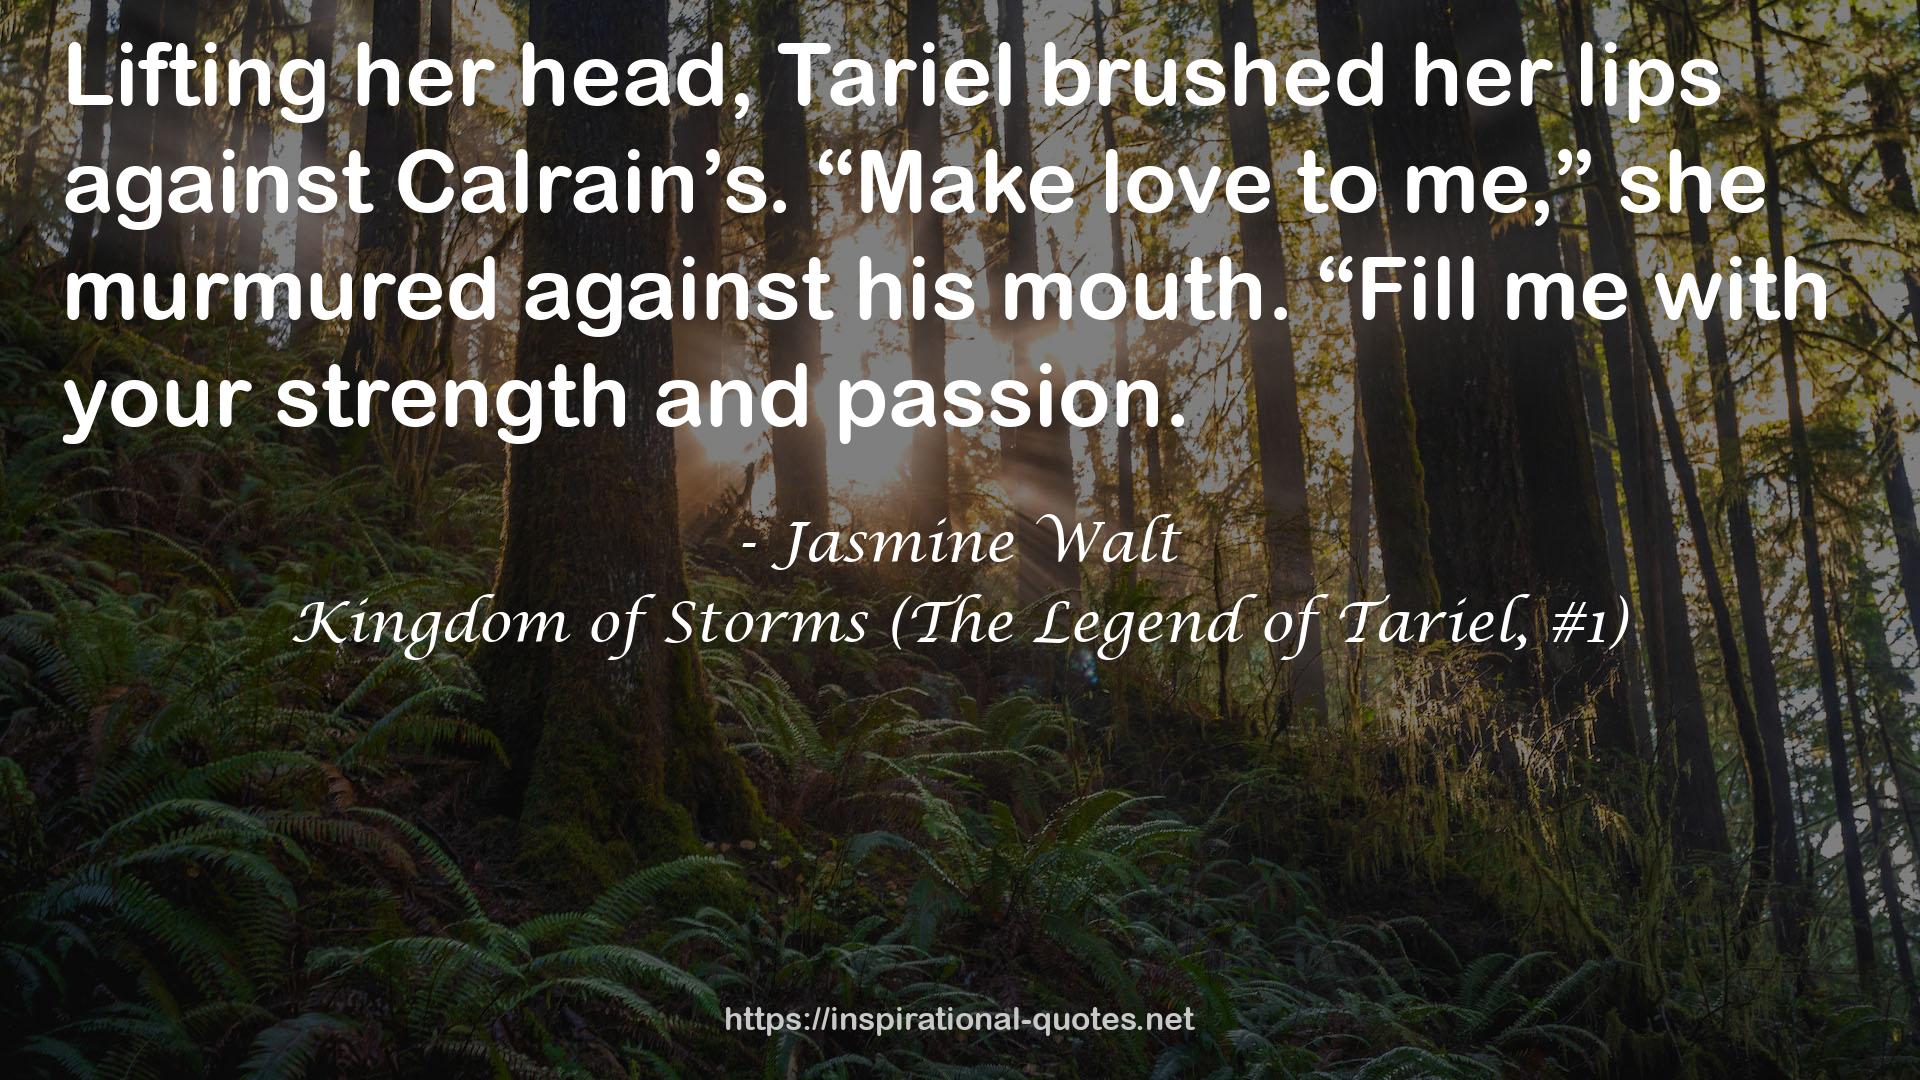 Kingdom of Storms (The Legend of Tariel, #1) QUOTES